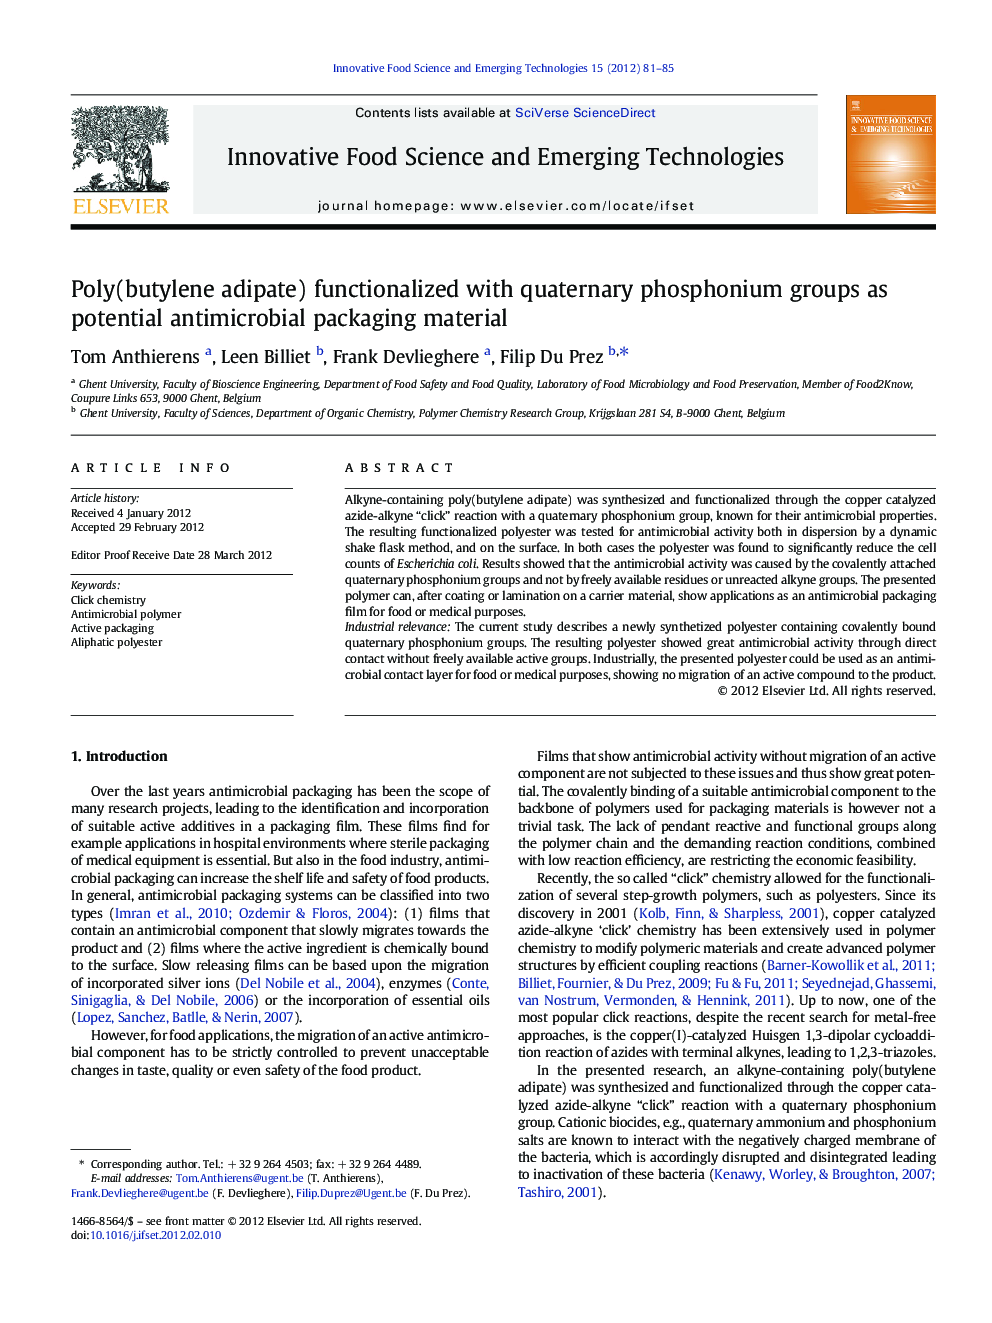 Poly(butylene adipate) functionalized with quaternary phosphonium groups as potential antimicrobial packaging material